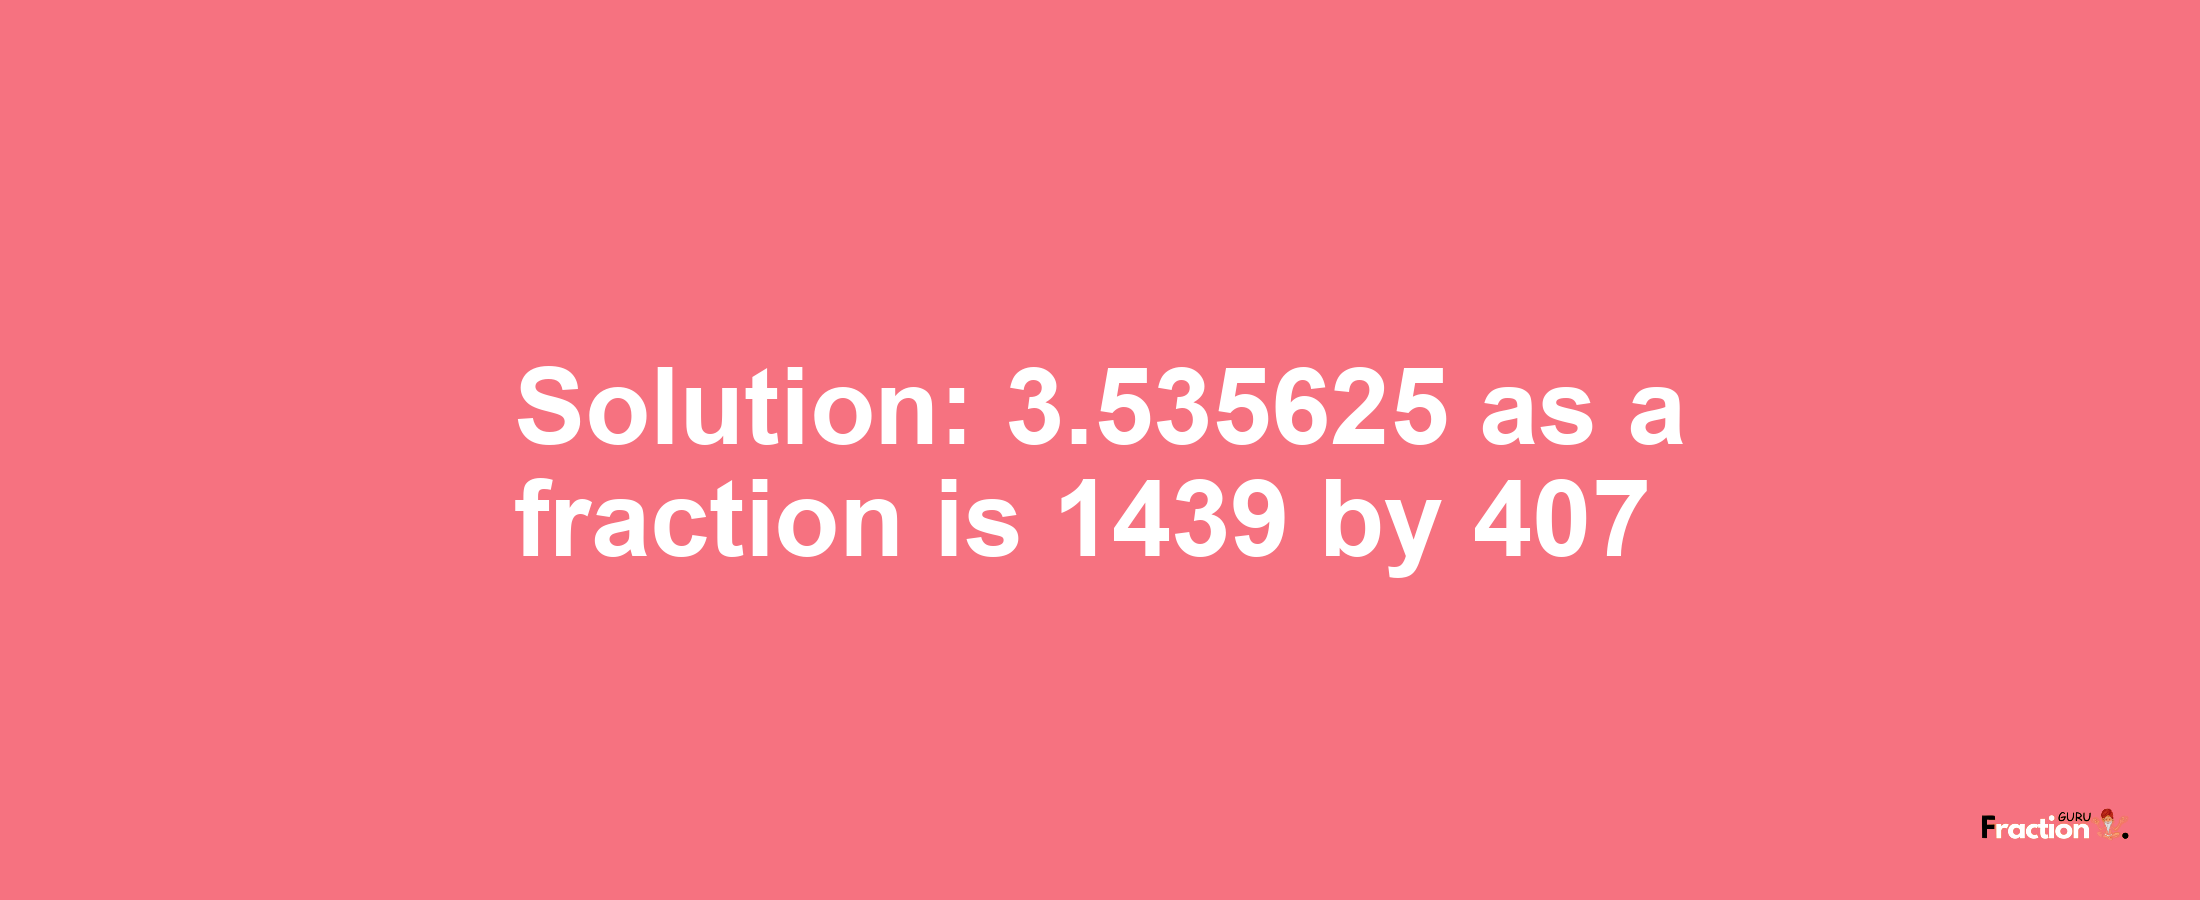 Solution:3.535625 as a fraction is 1439/407